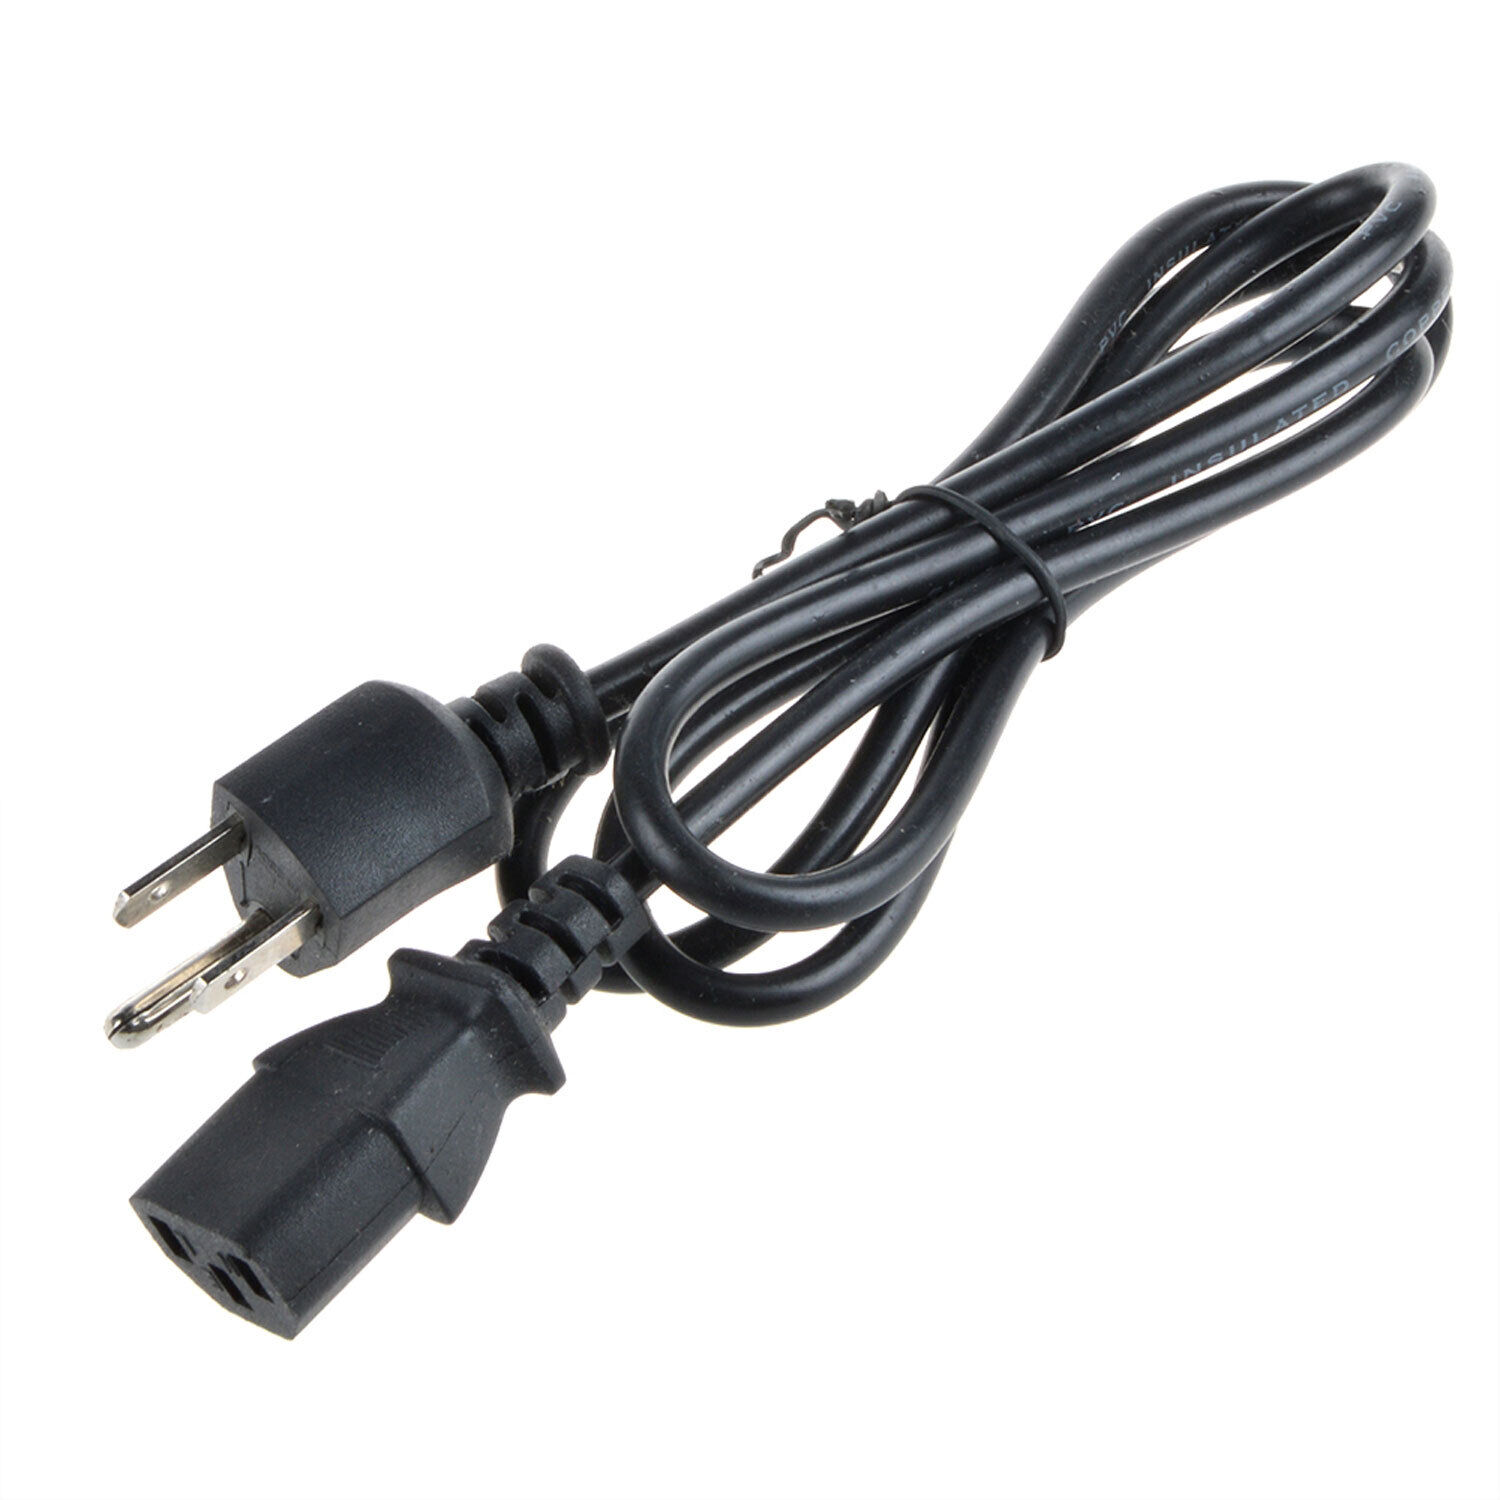 PwrON 5FT AC Power Cord Cable for Lenovo ThinkVision T23i-10 computer monitor